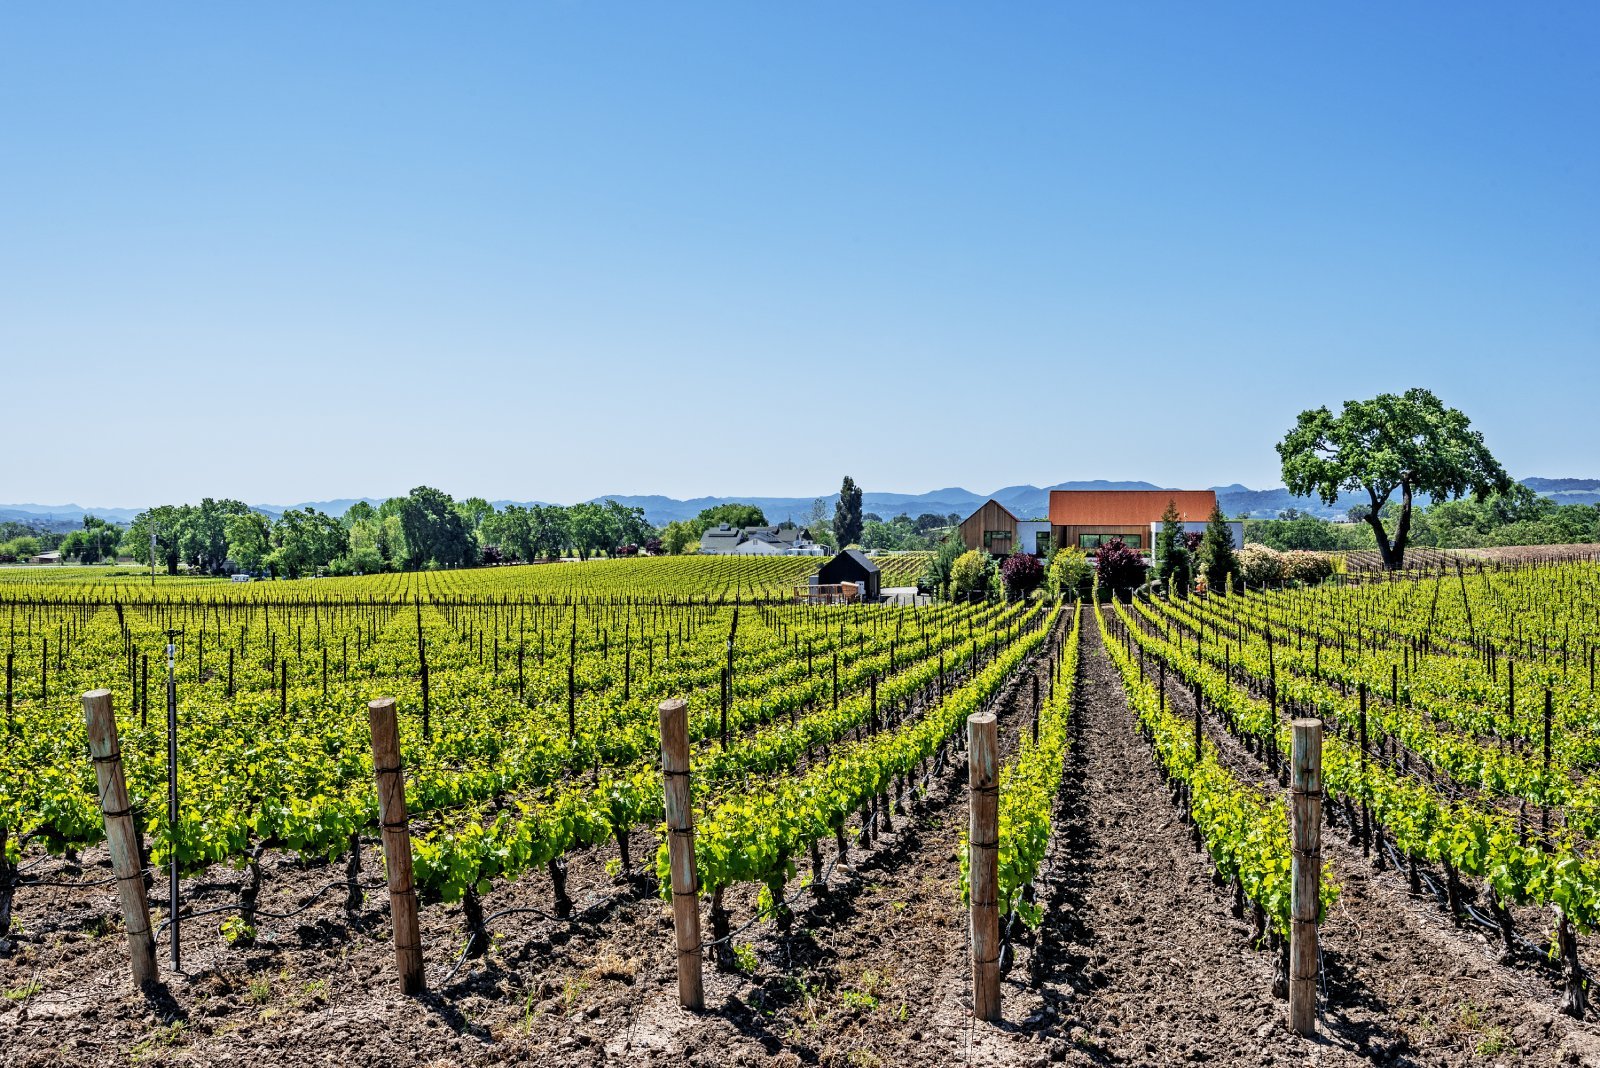 <p class="wp-caption-text">Image Credit: Shutterstock / randy andy</p>  <p><span>Spanning from Santa Barbara to Monterey, the Central Coast is a vast area that produces a wide variety of wines, from robust reds to delicate whites.</span></p>